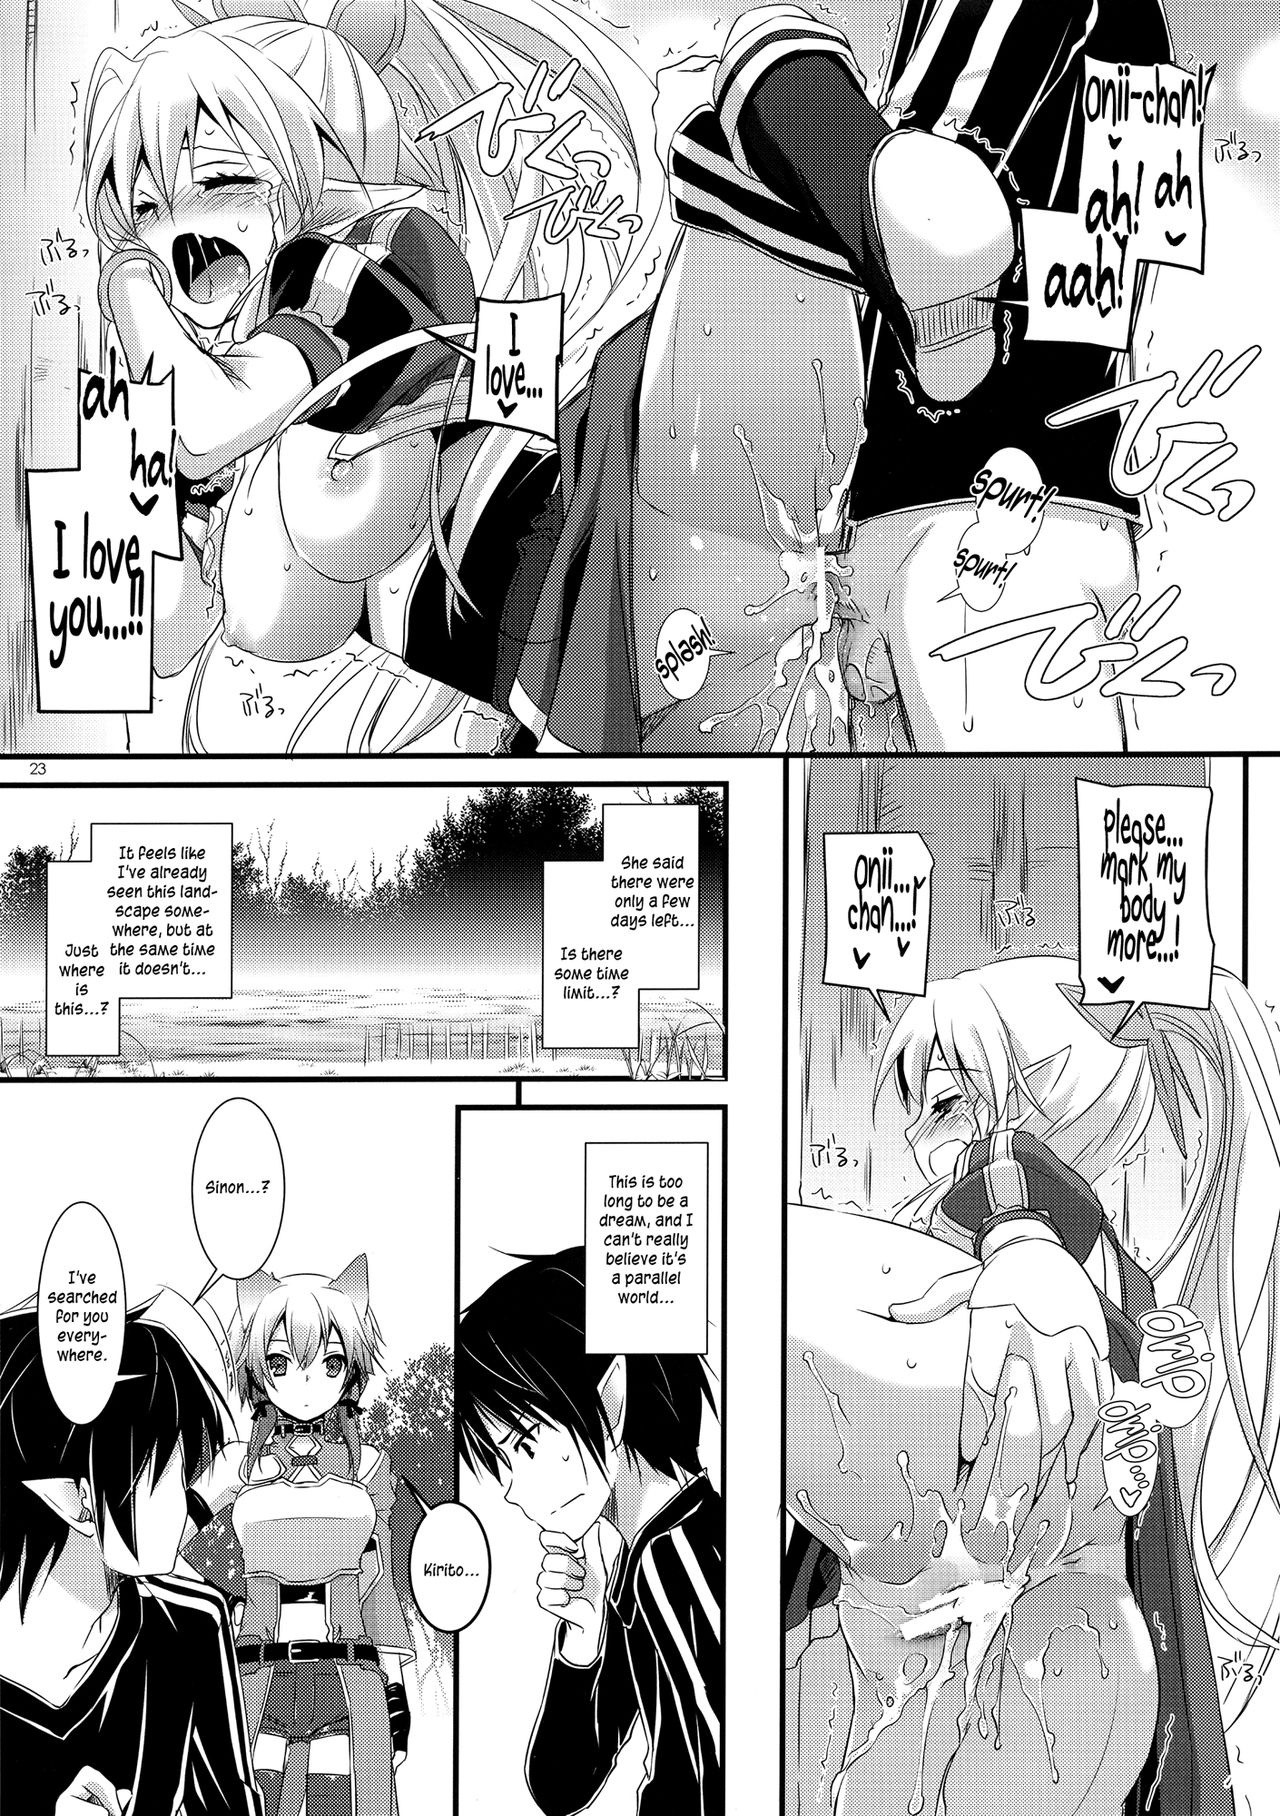 D.L. Action 72 hentai manga picture 22